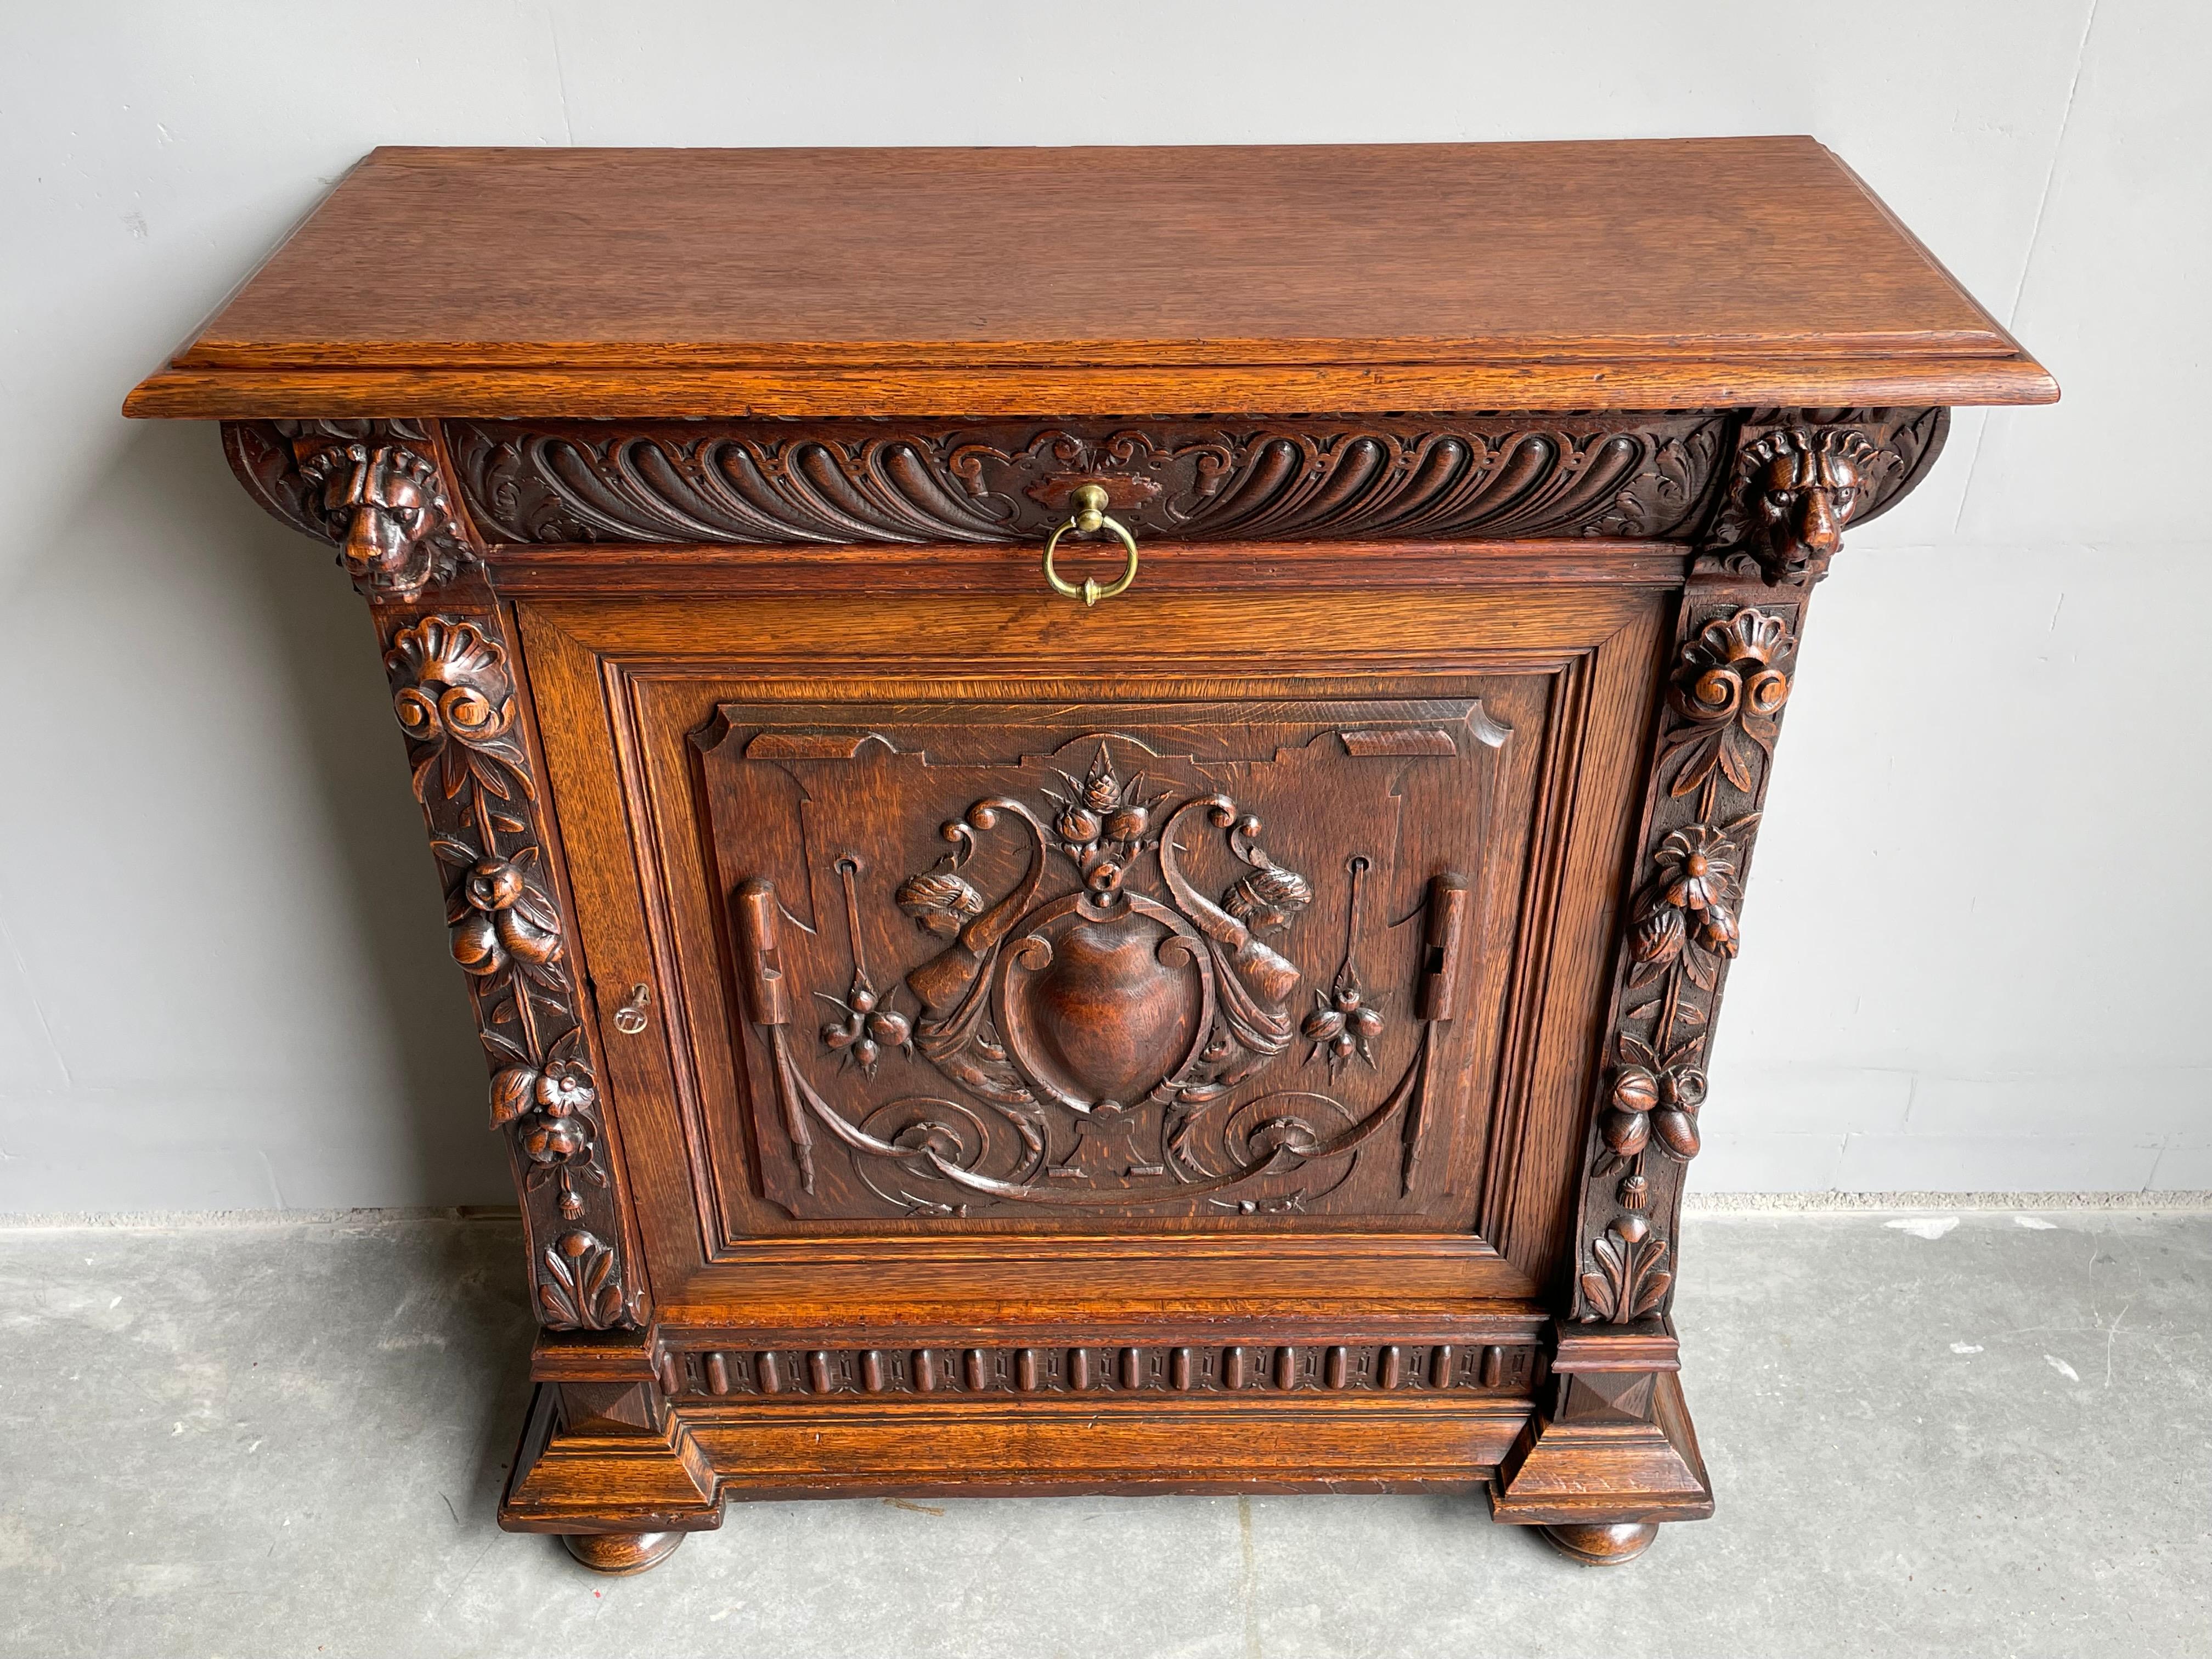 Marvelous design and practical size, antique oak cabinet from the mid 1800s.

This rare Dutch Renaissance Revival cabinet is in the best condition possible and it has the most amazing patina. All hand carved from solid tiger oak this rare antique